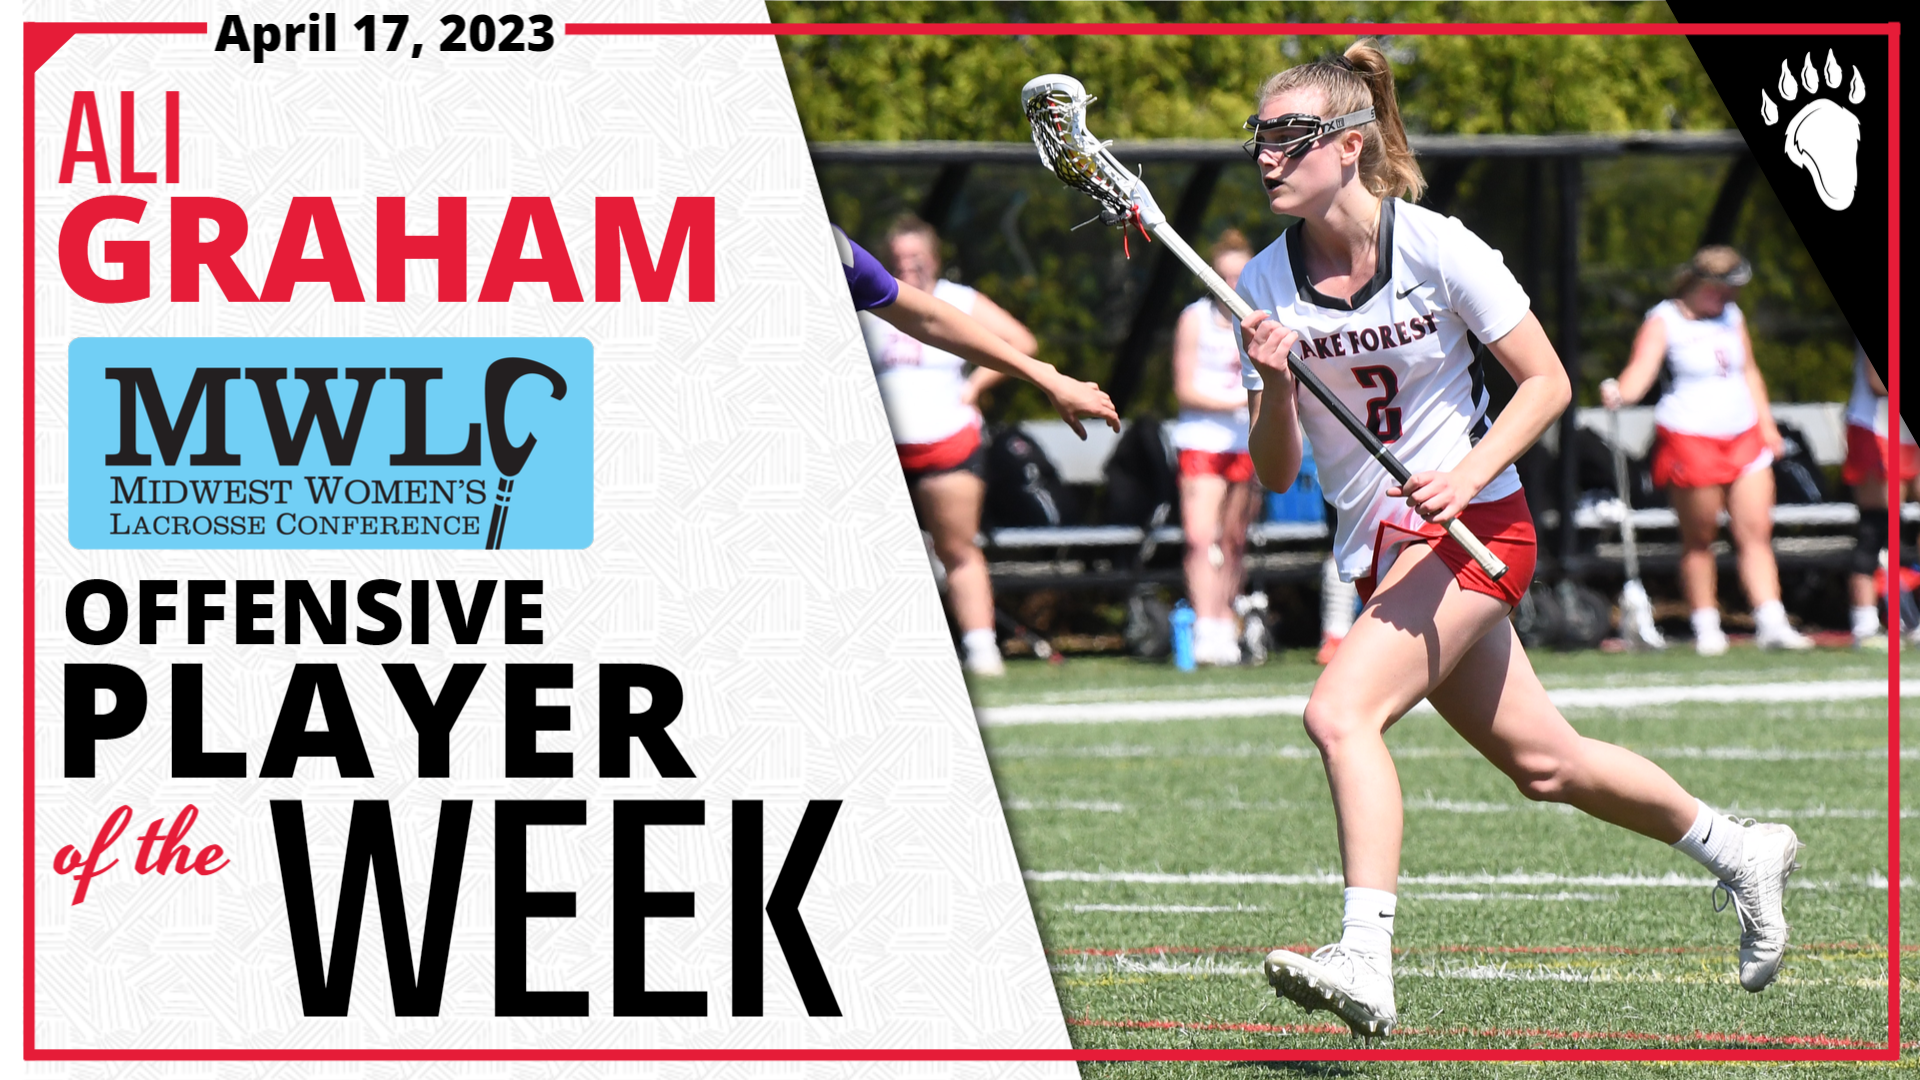 Ali Graham Named MWLC Offensive Player of the Week